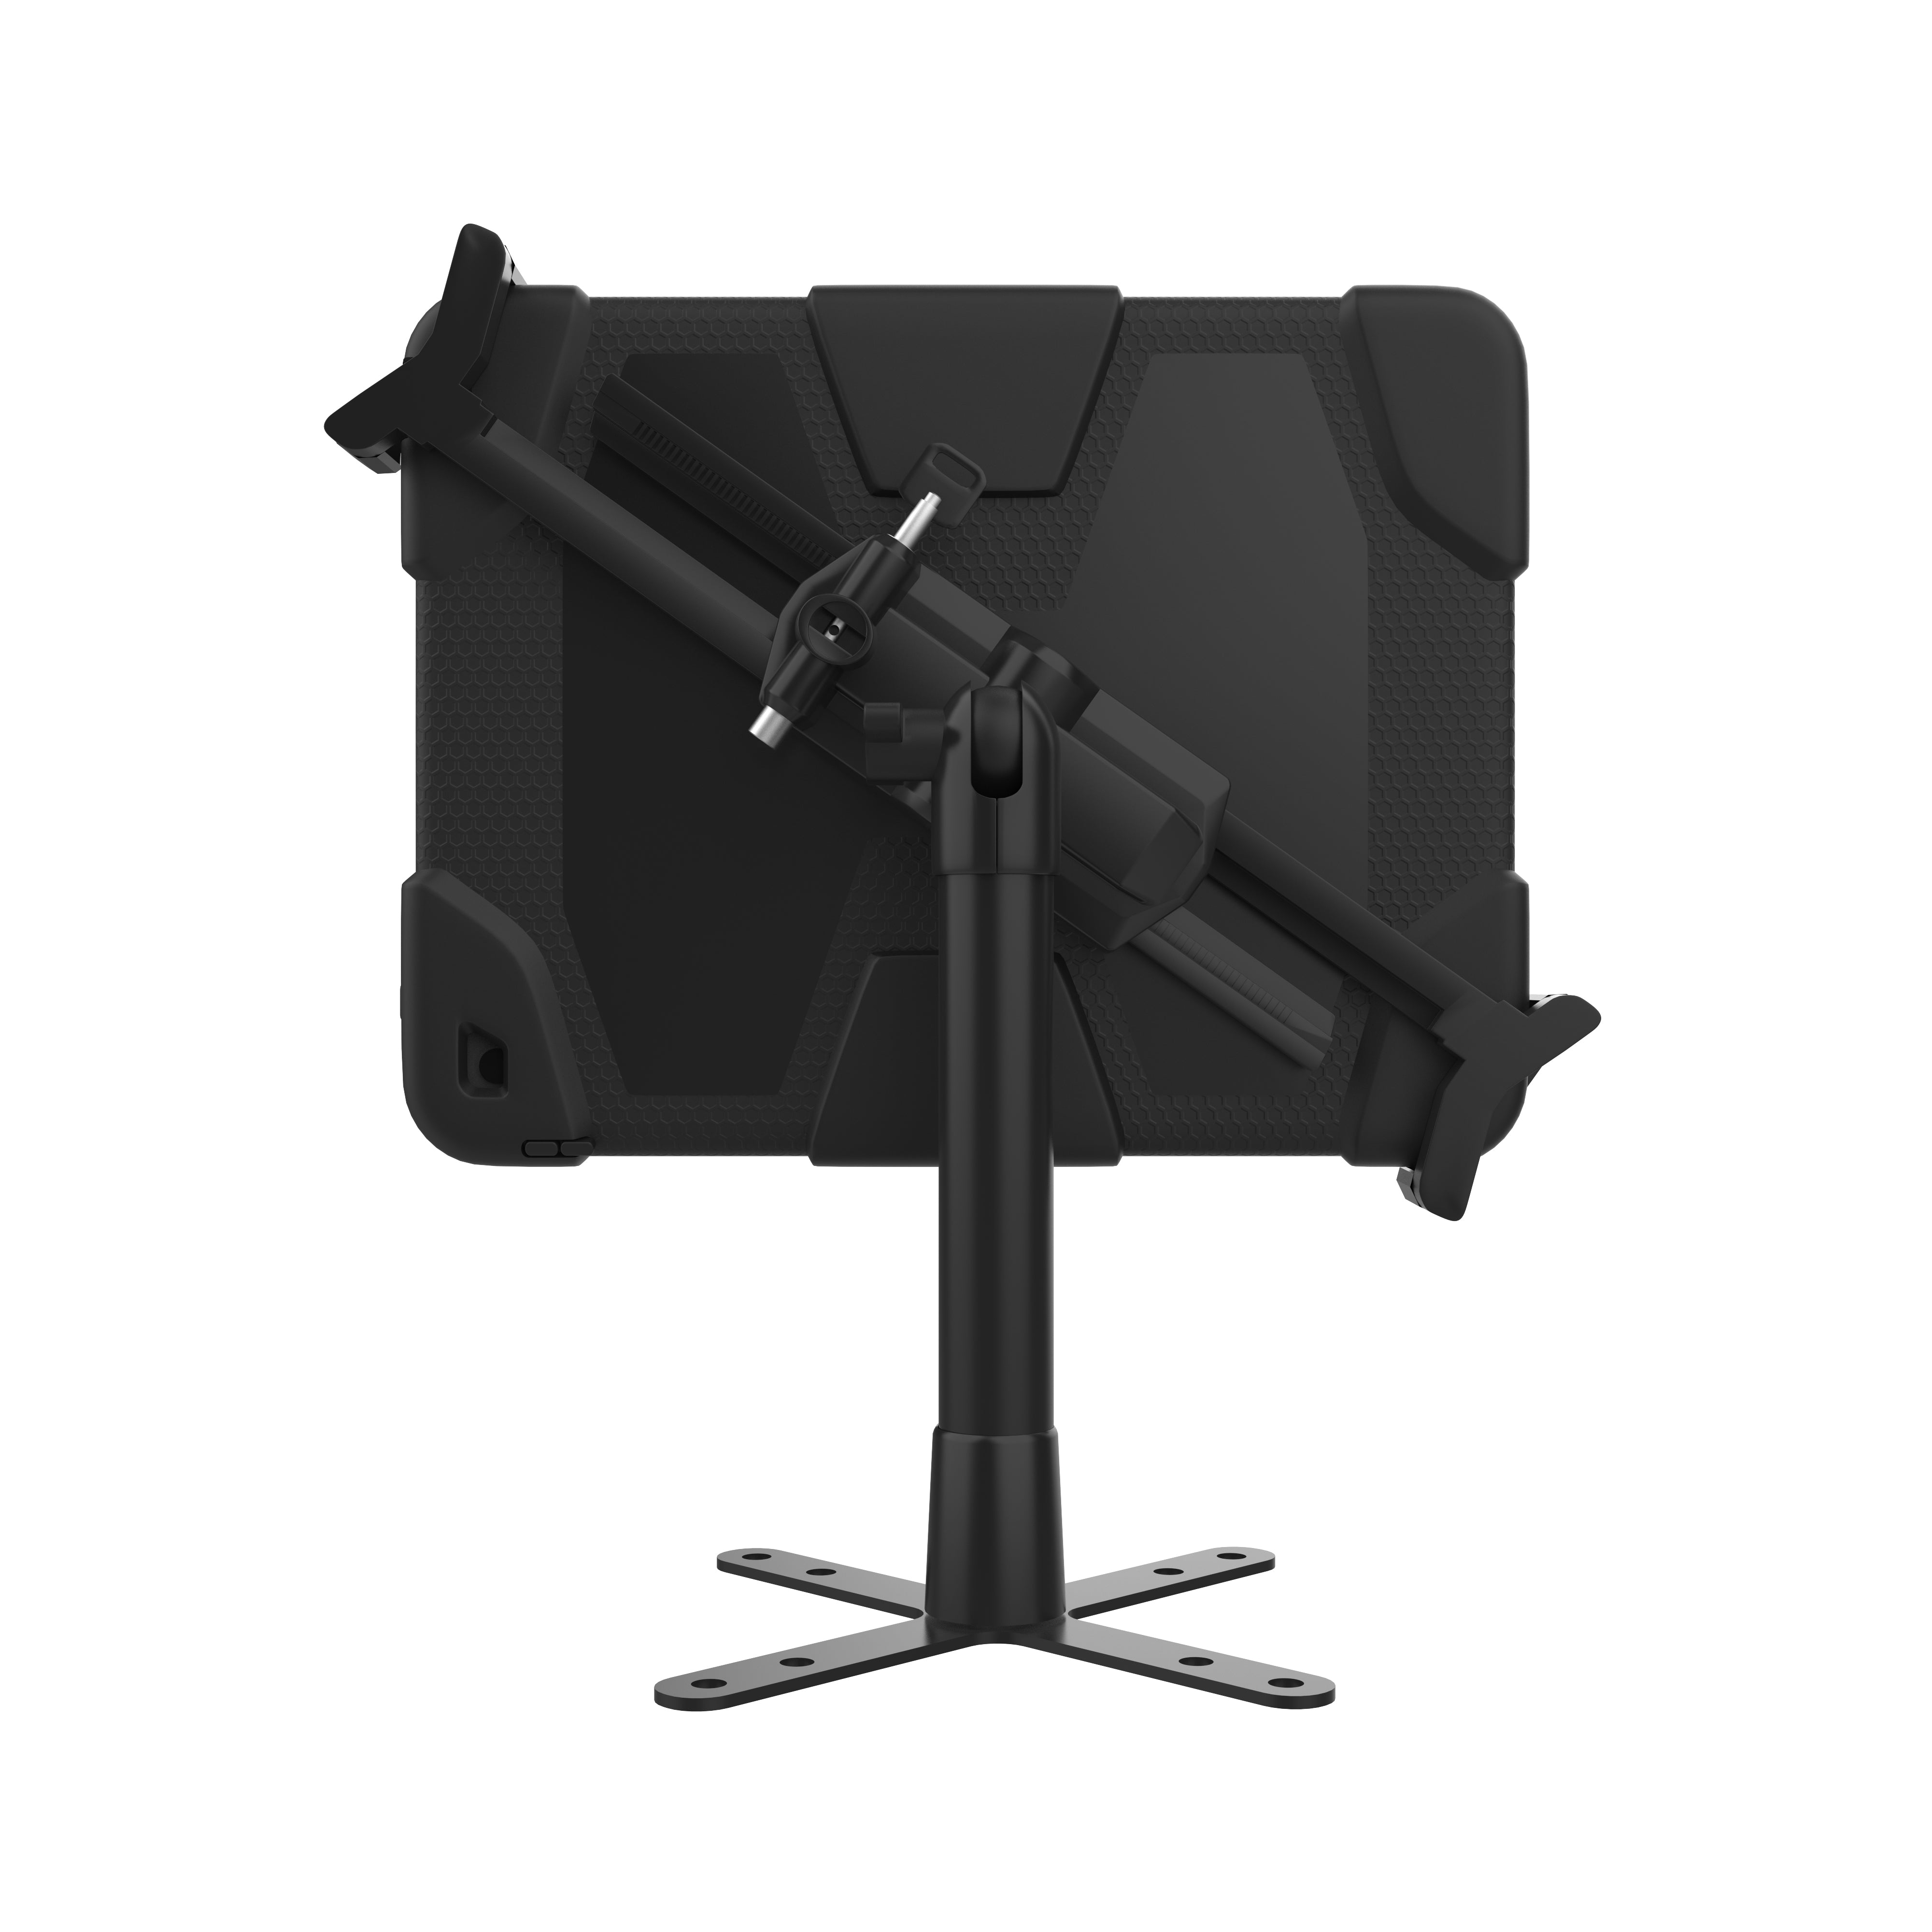 Security VESA and Wall Mount with 5” Extender Pole for 7-14” Tablets (Black)